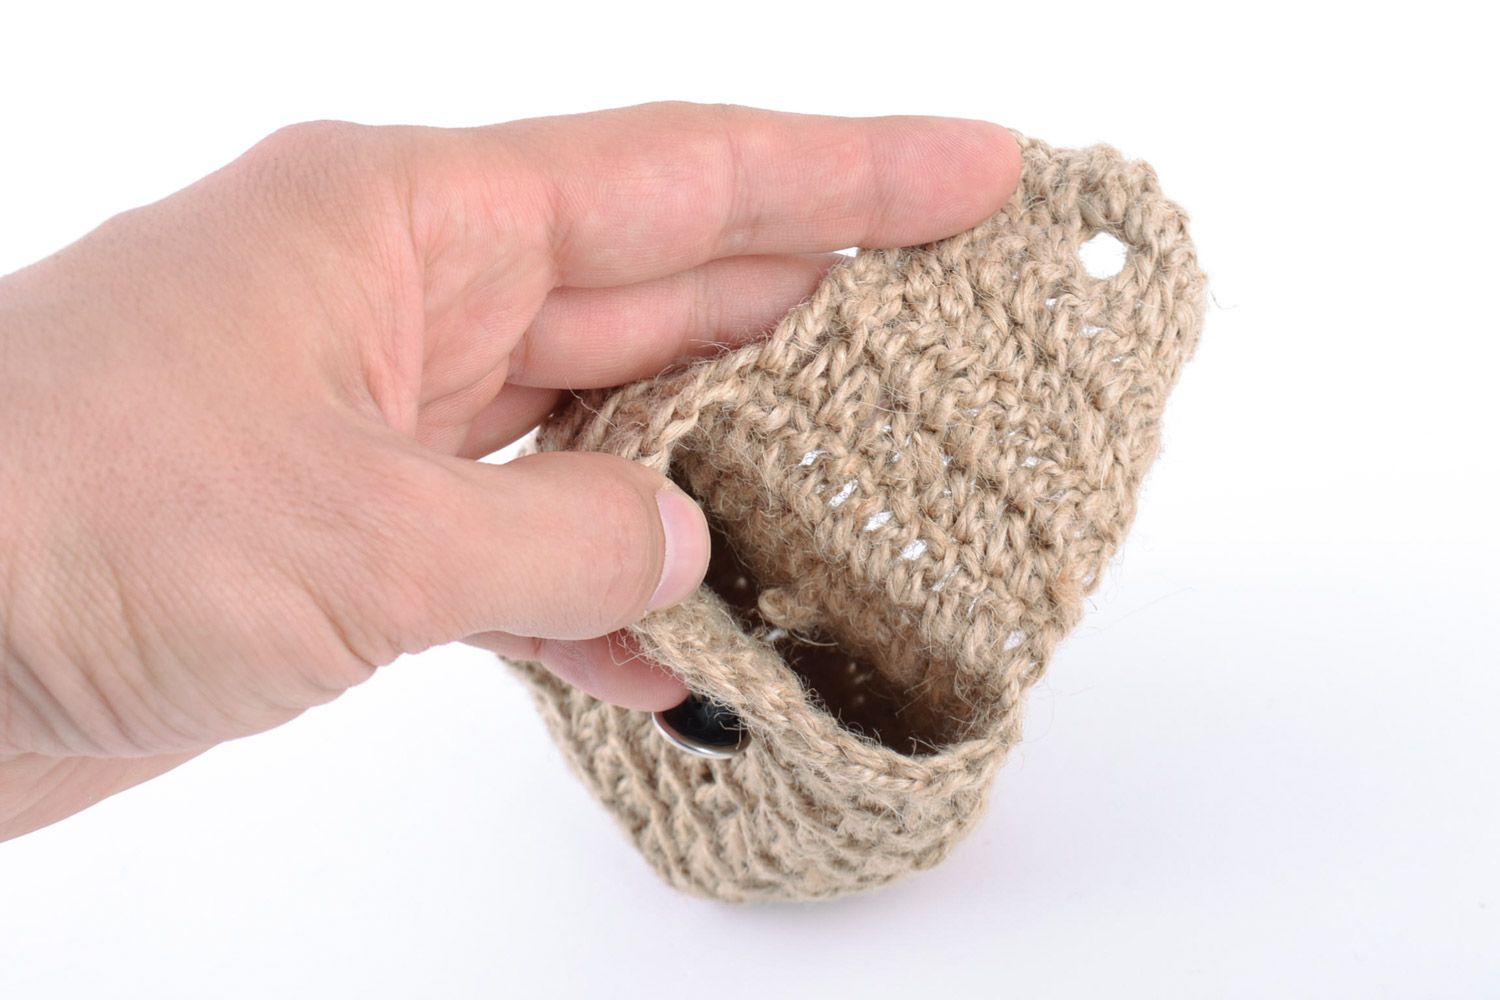 Small handmade pouch case crochet of twine for coins or phone photo 2